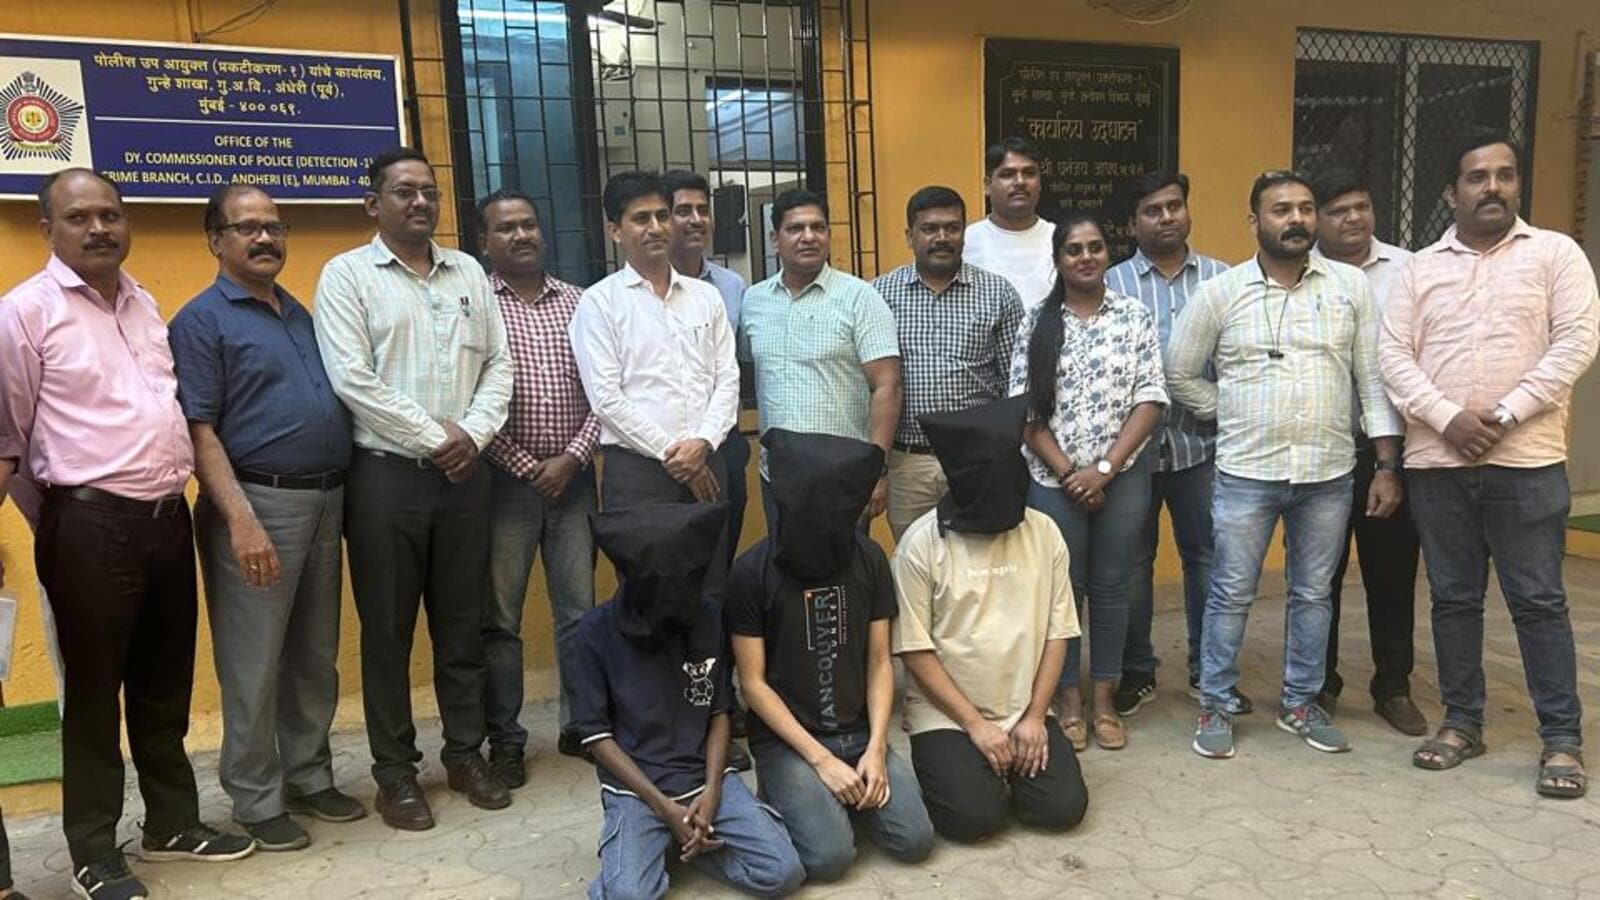 Make-up artiste among three held for duping forex traders of $60,000 | Mumbai news